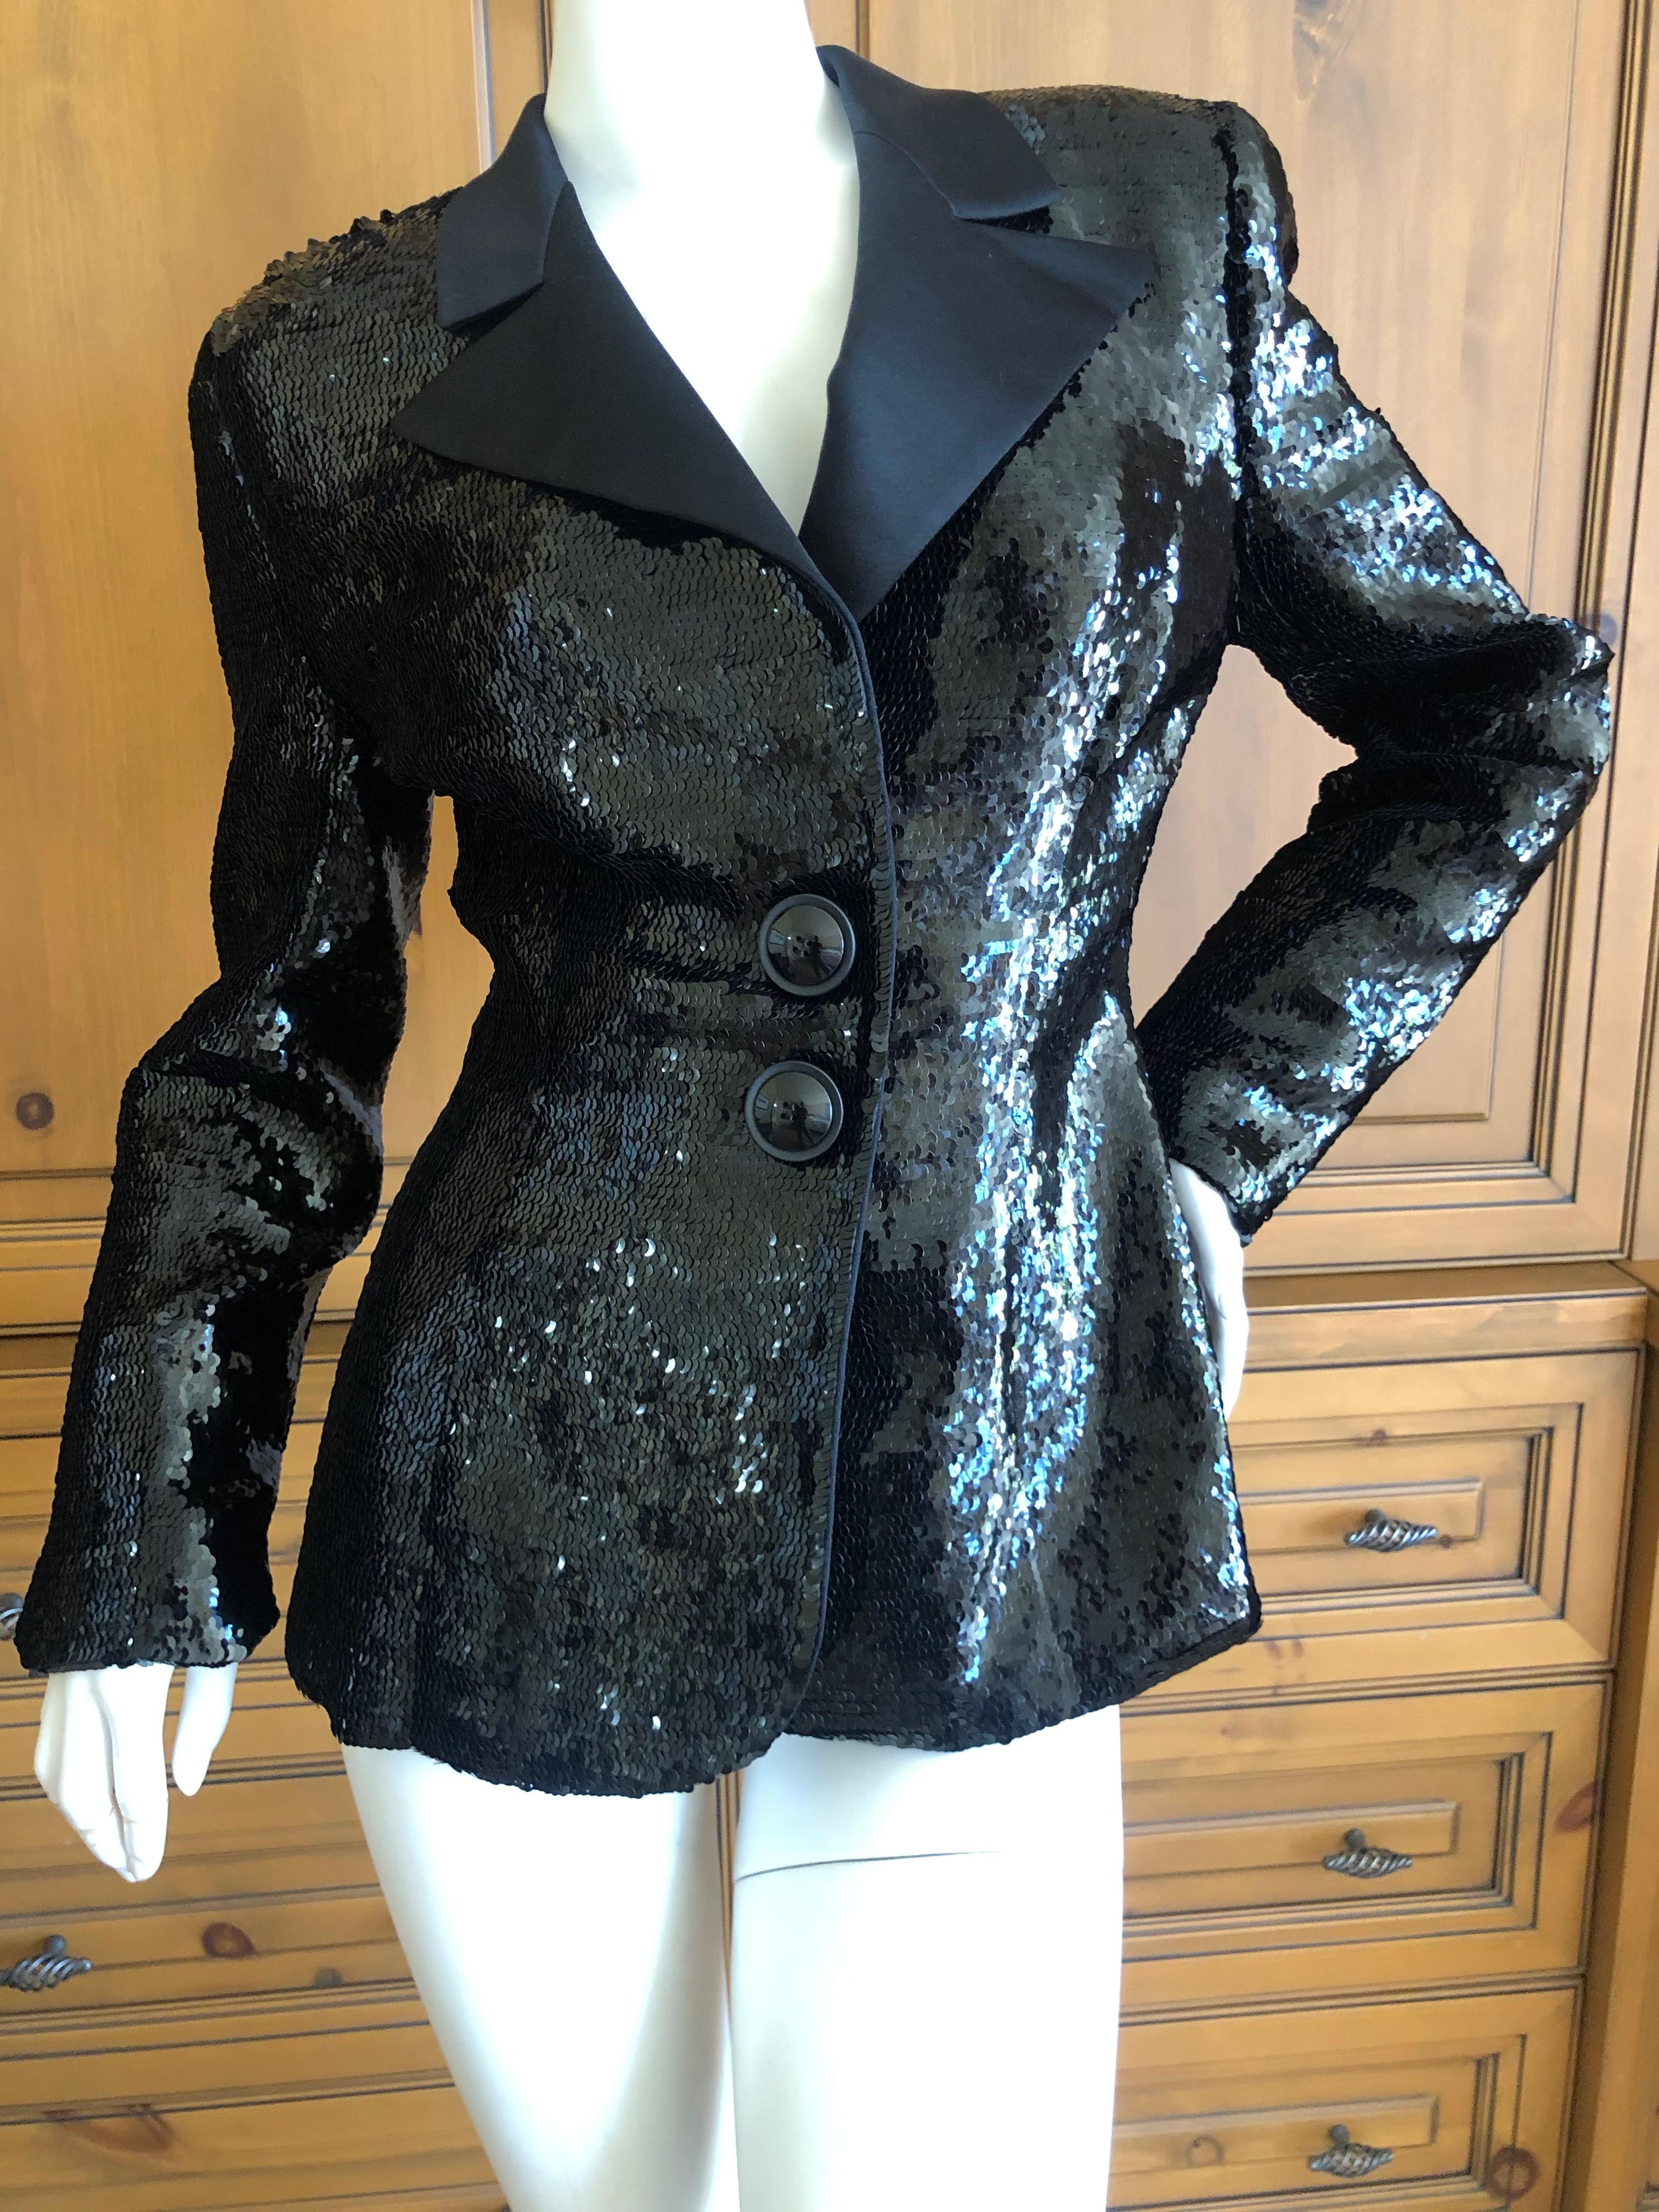 Galanos for Bergdorf Goodman Classic Black Sequin Tuxedo Jacket w Satin Lapels  In Excellent Condition For Sale In Cloverdale, CA